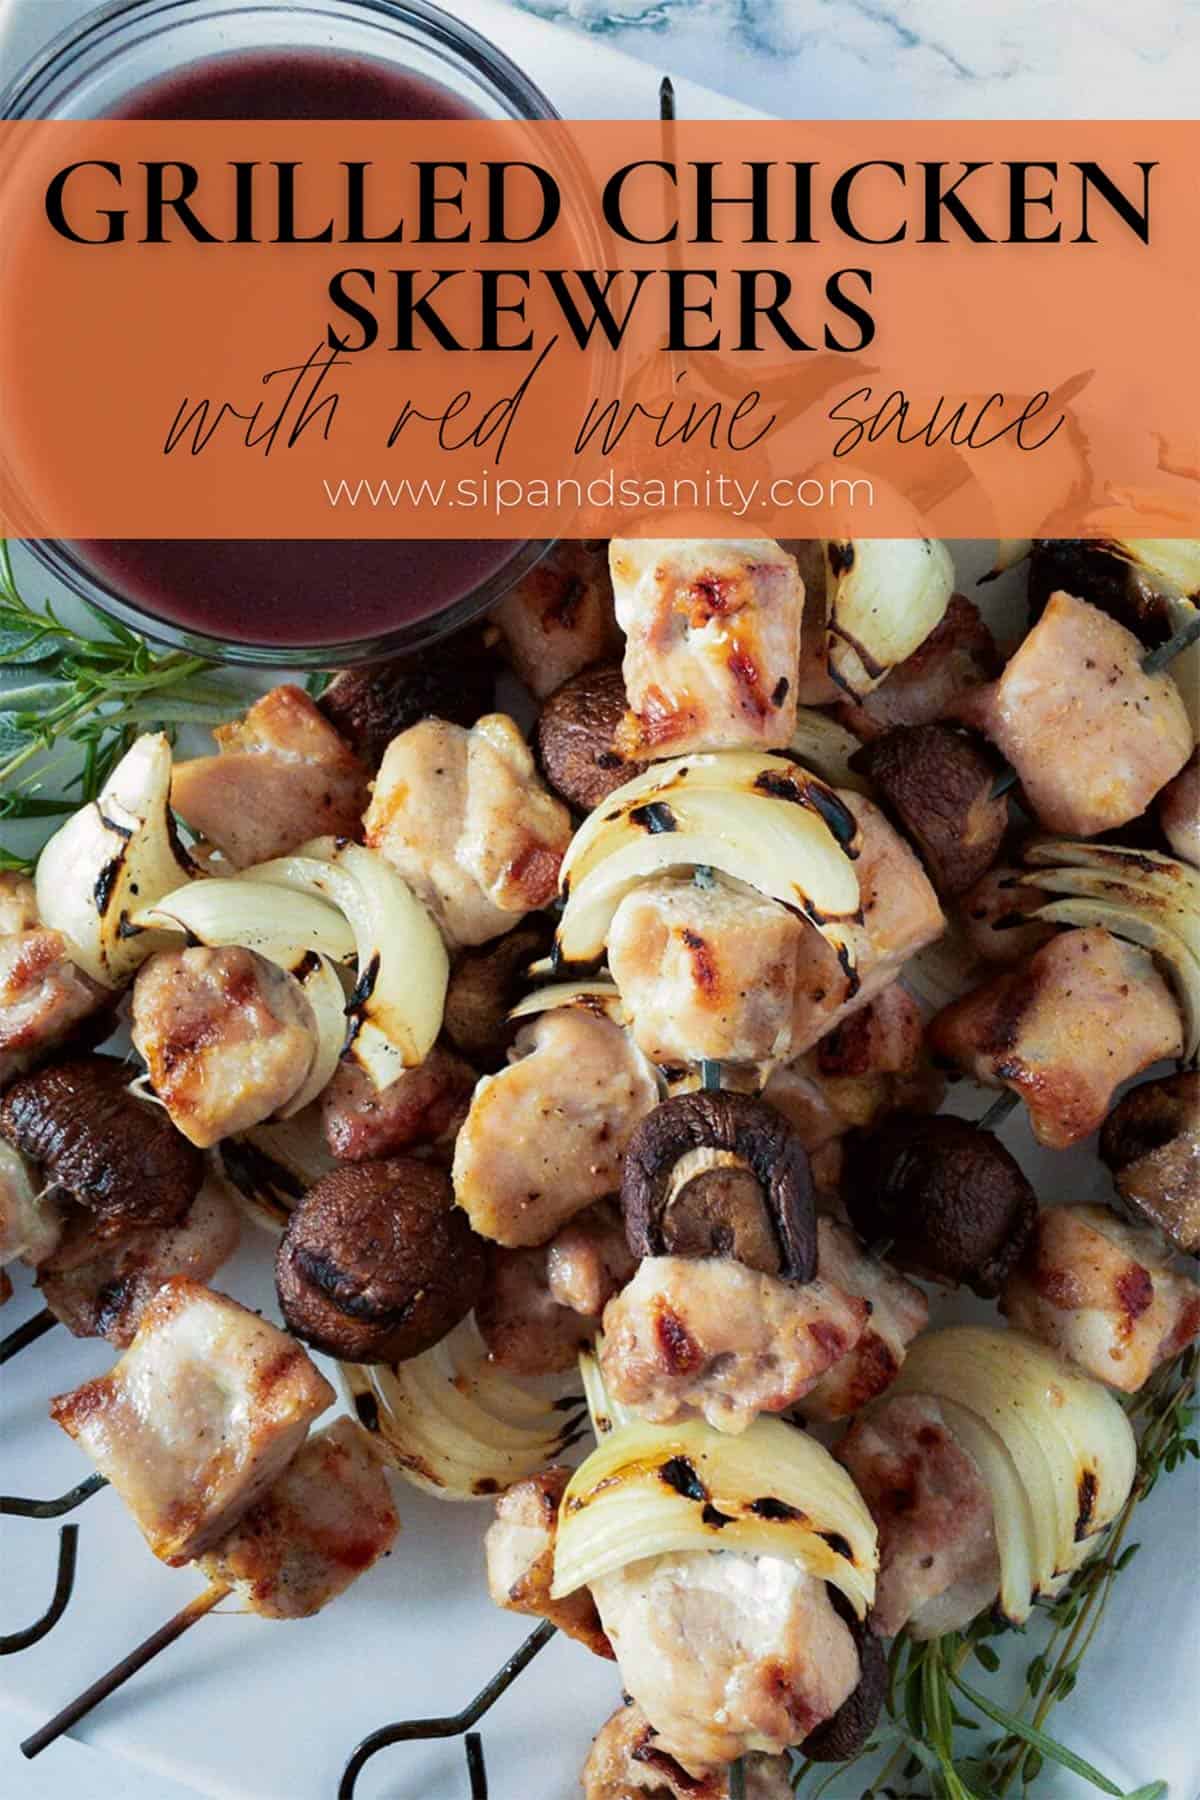 Pin image for grilled chicken skewers.